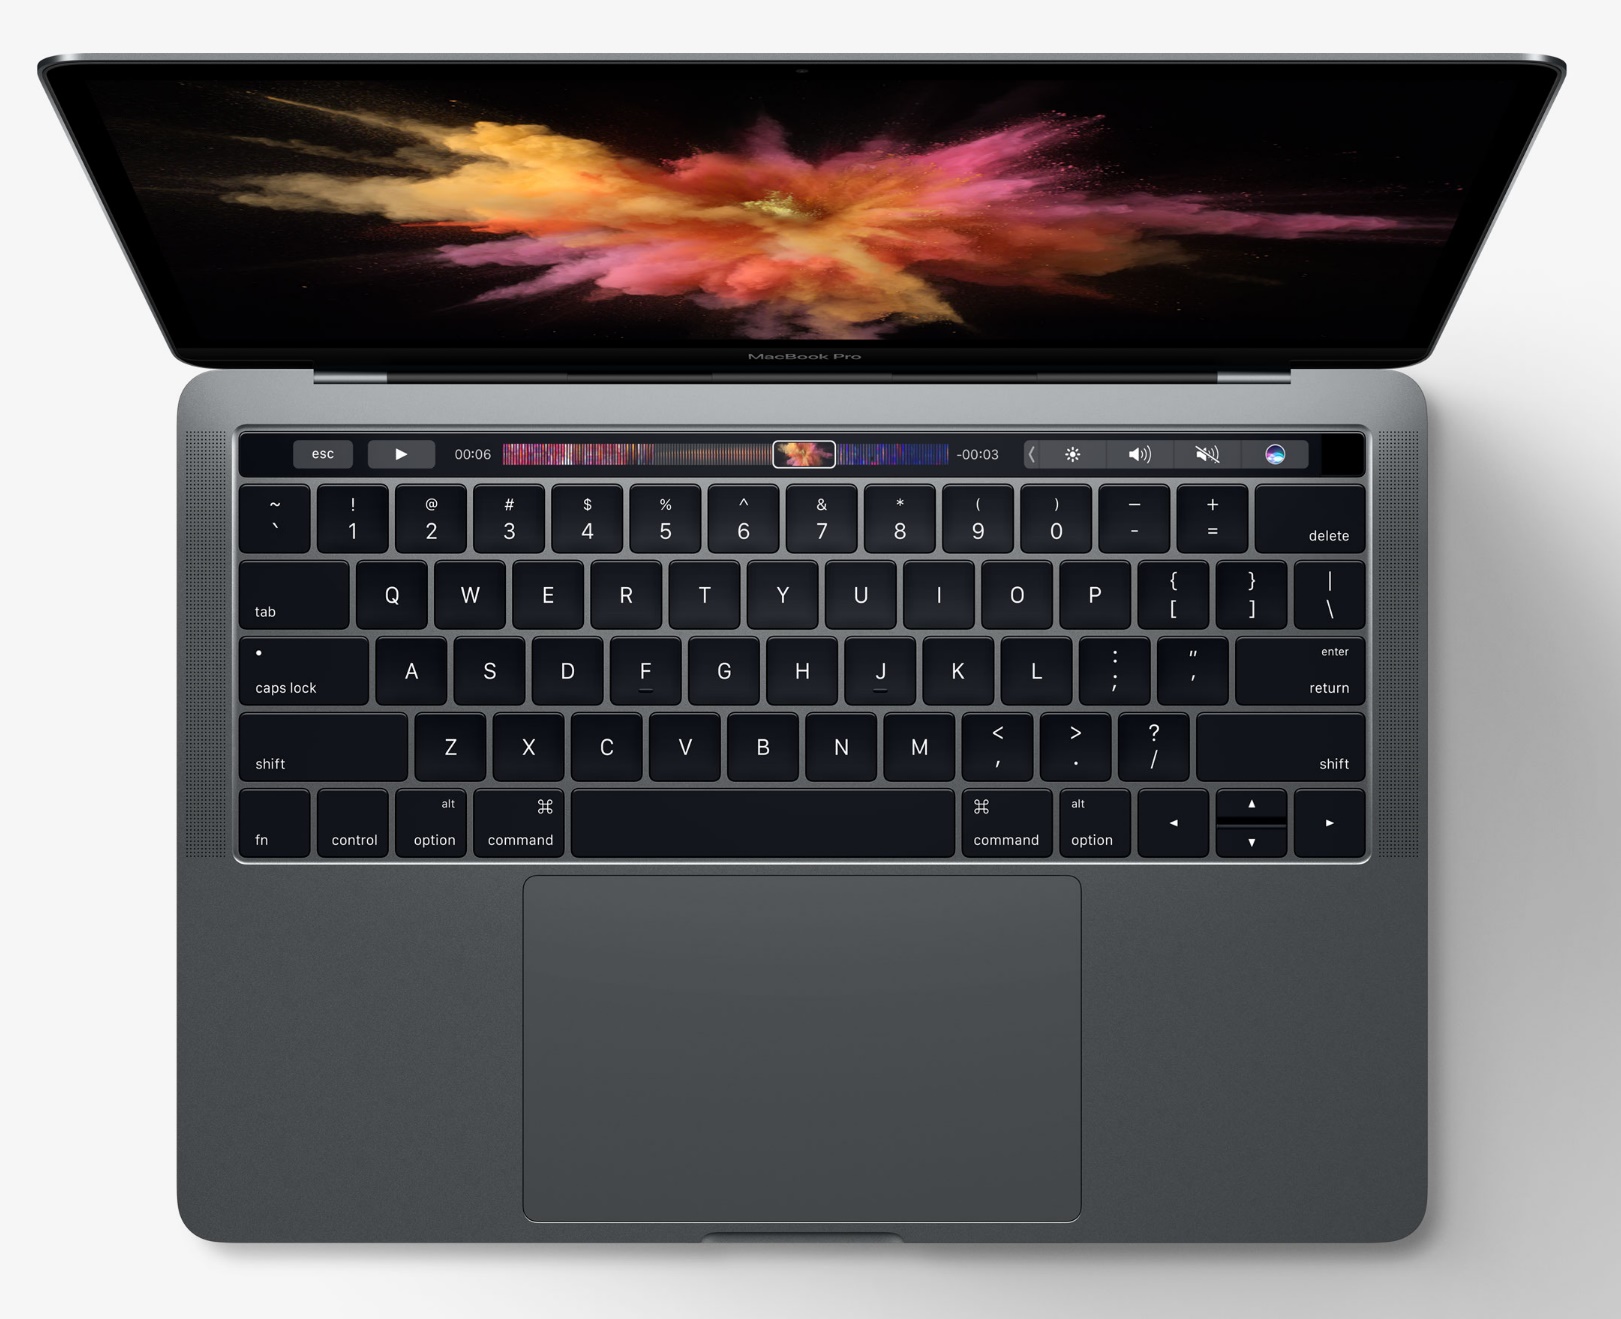 Did you just get a new MacBook? Here’s your 8-point checklist